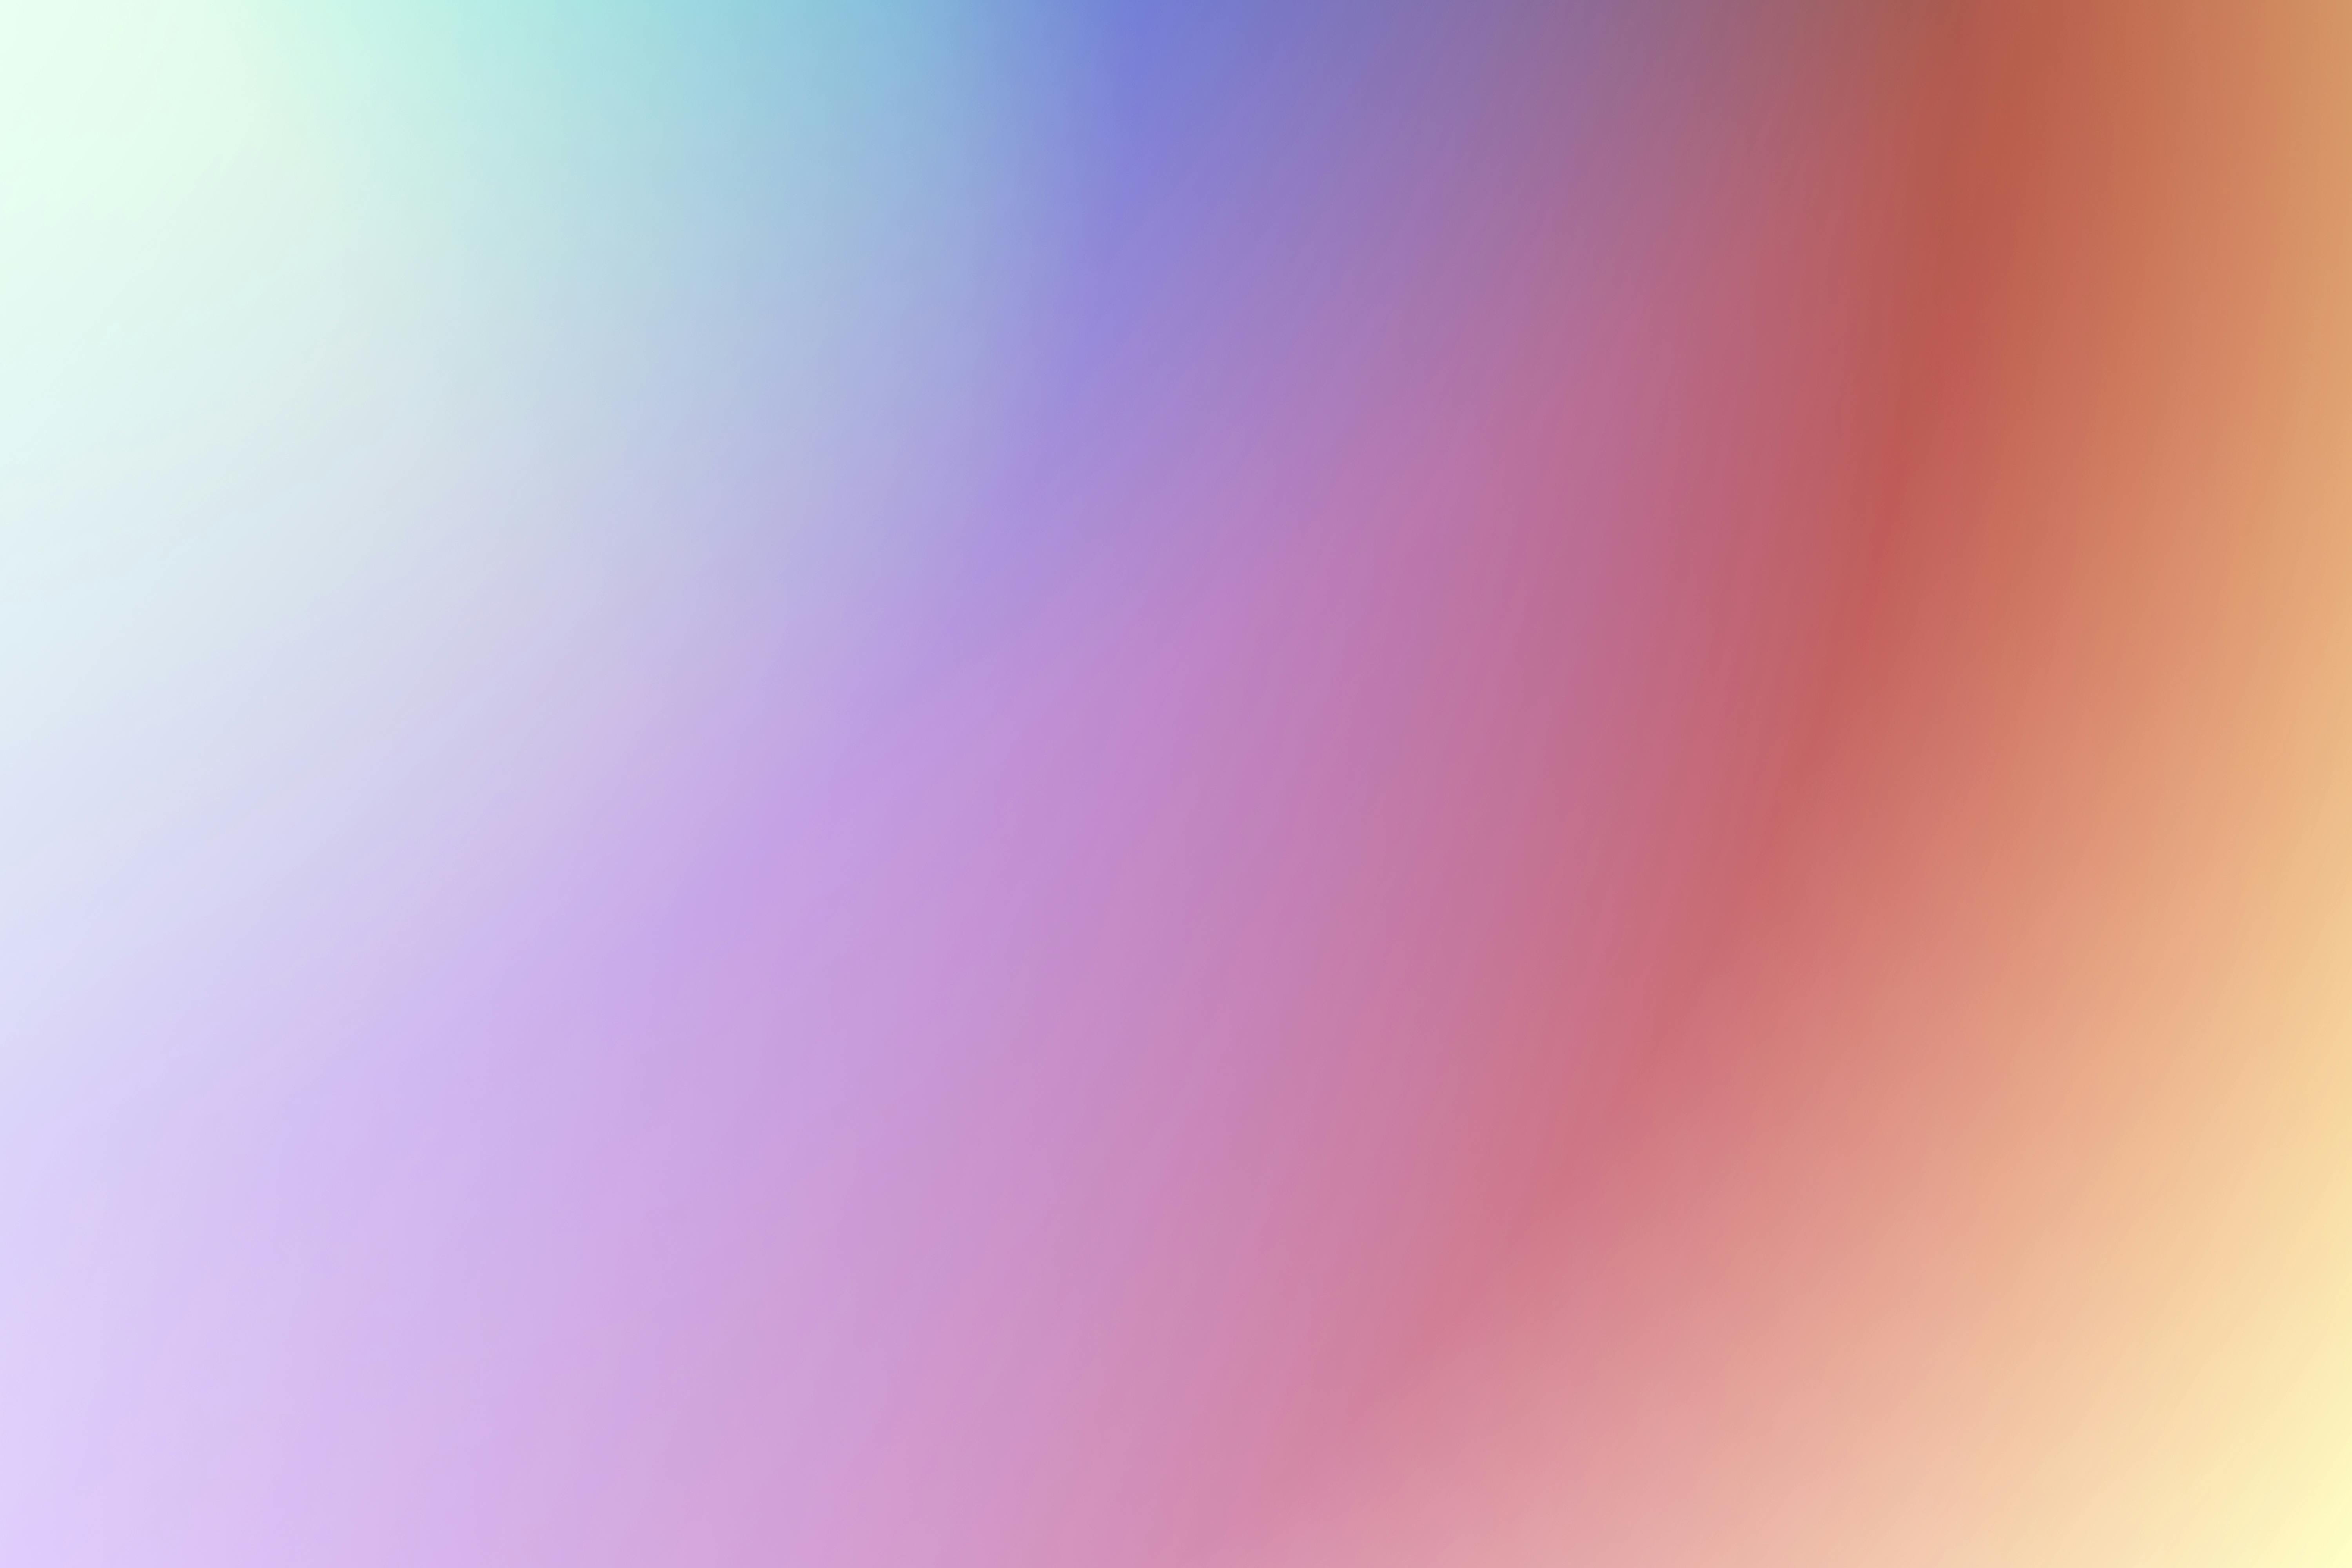 Red and Blue Gradient · Free Stock Photo